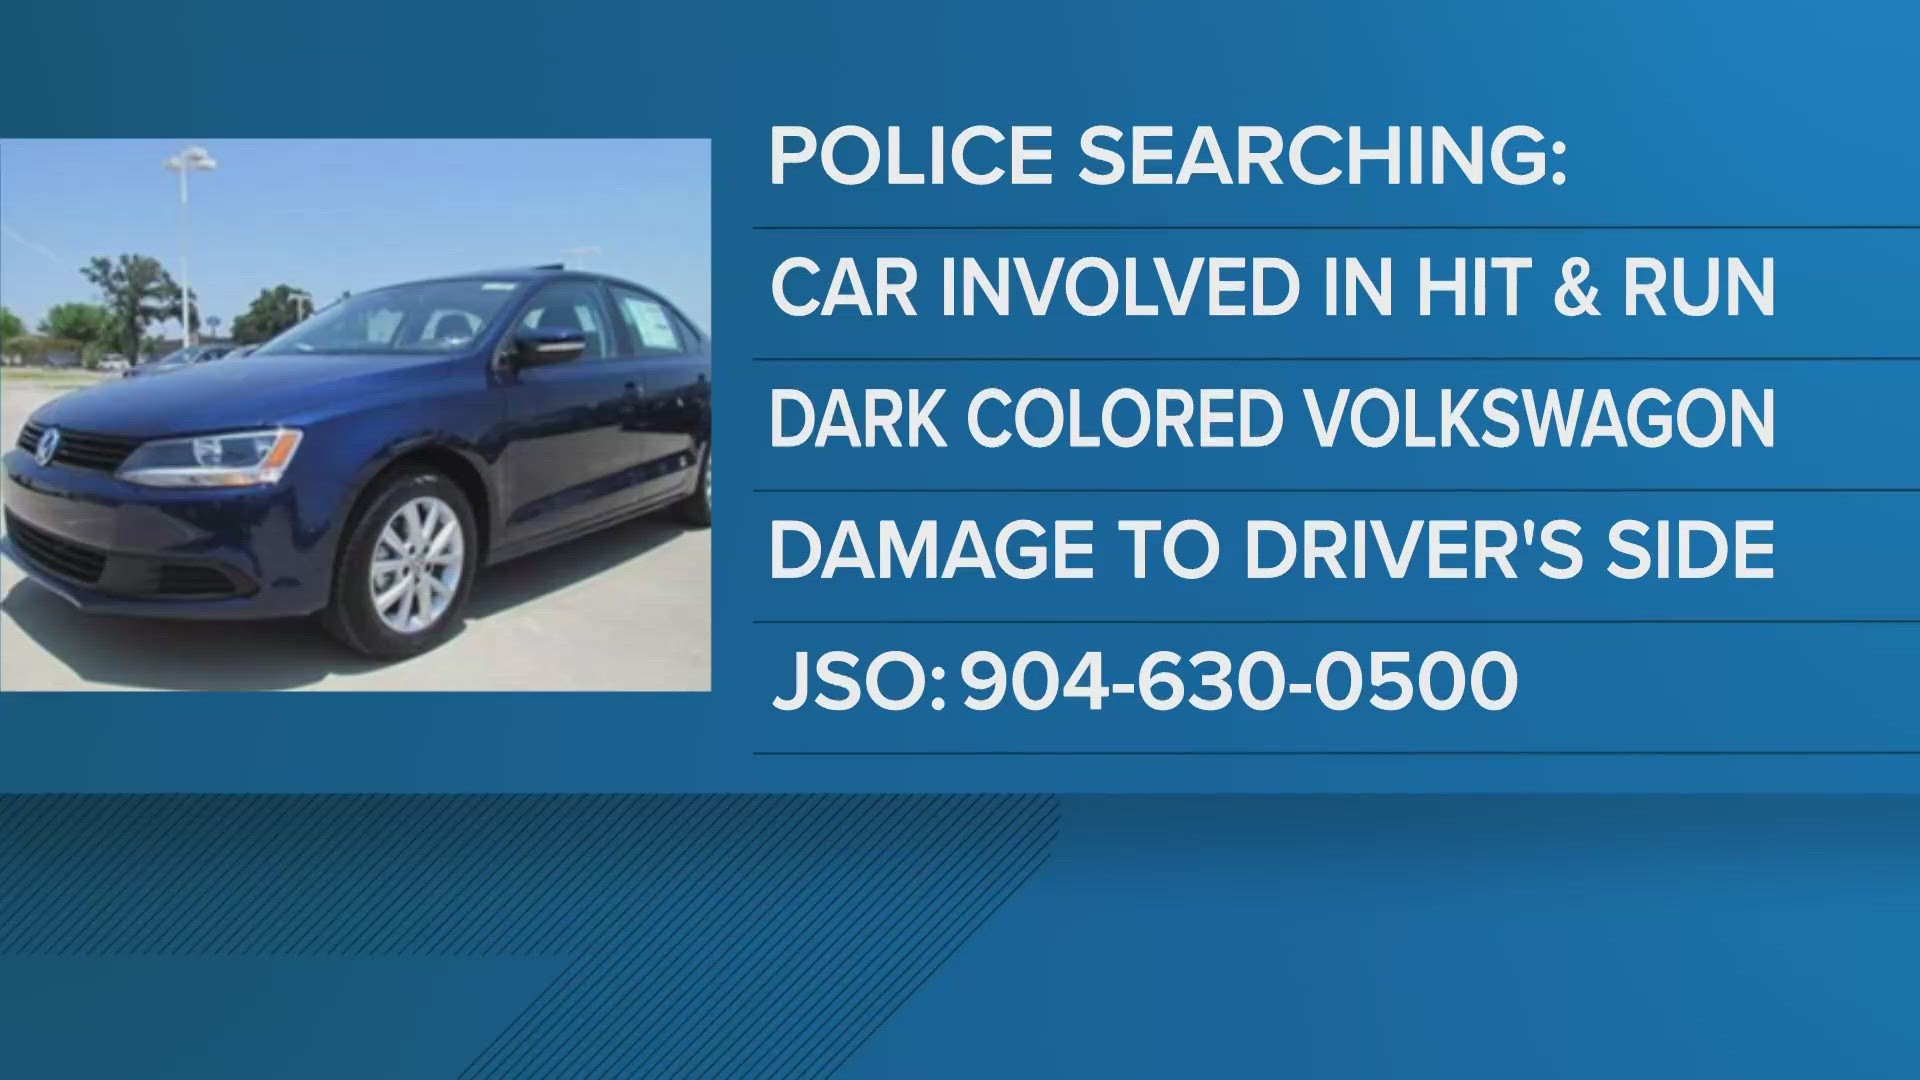 The Jacksonville Sheriff's Office believes a dark-colored Volkswagen Jetta was involved in a deadly hit-and-run on Blanding Boulevard on Dec. 1.